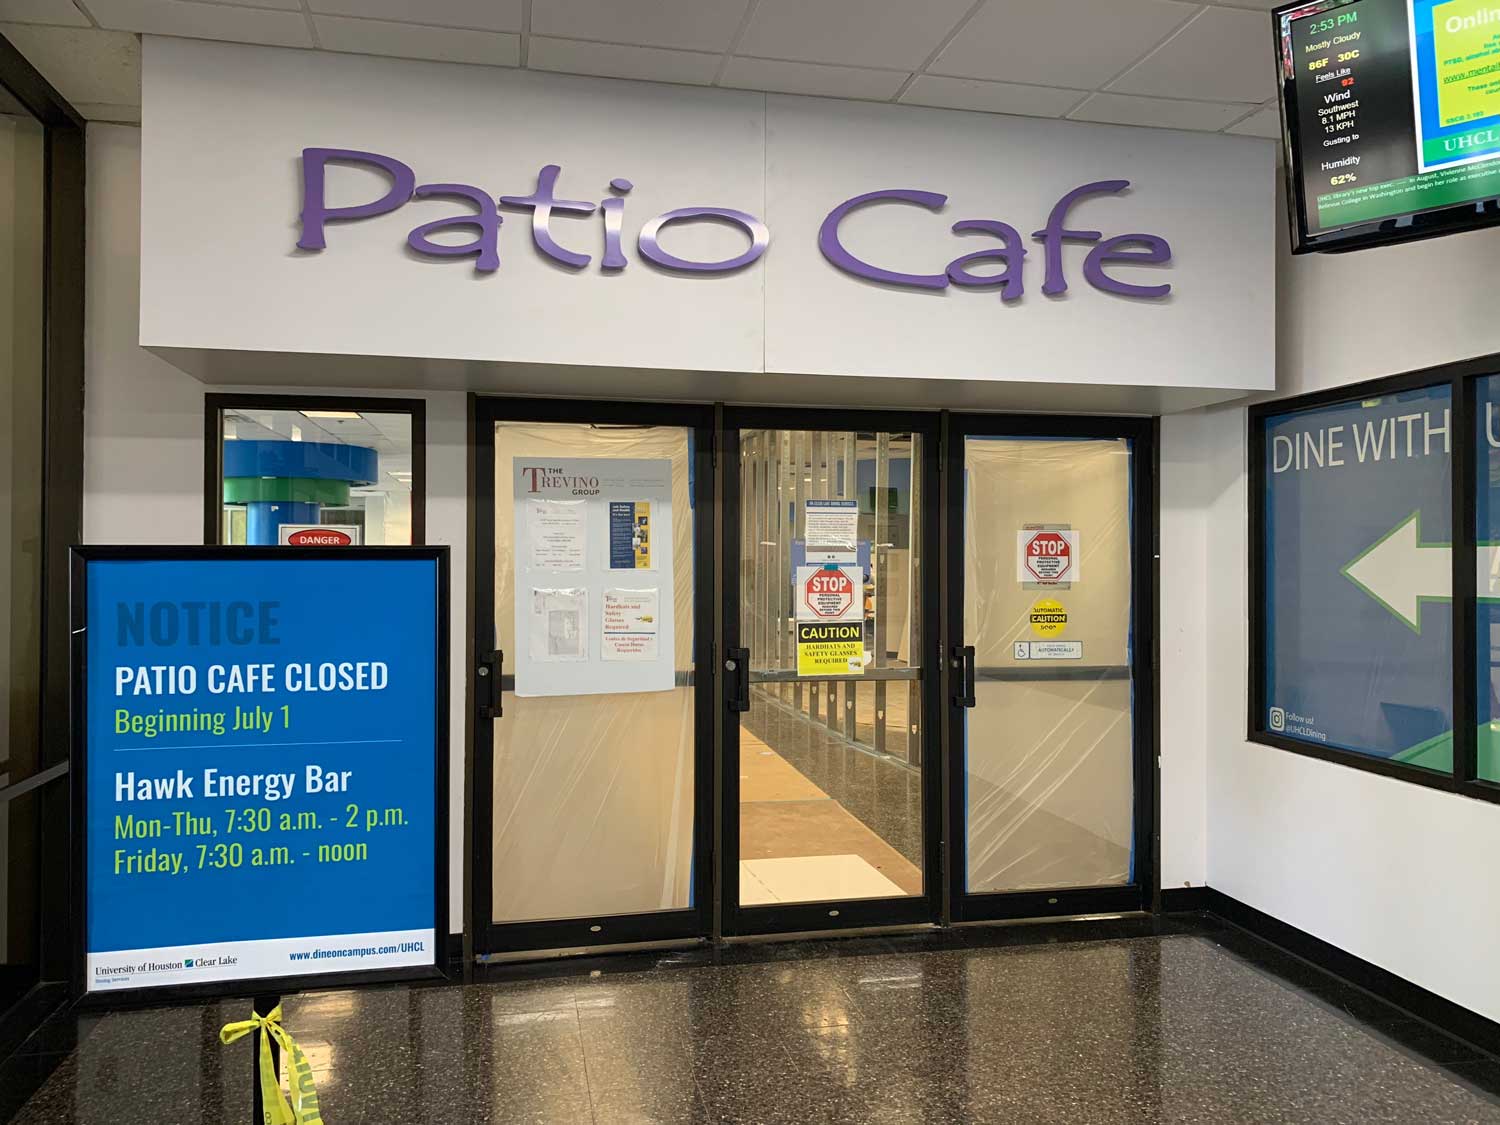 PHOTO: the Patio Café closed for construction with the Hawk Energy Bar hours listed on a sign.